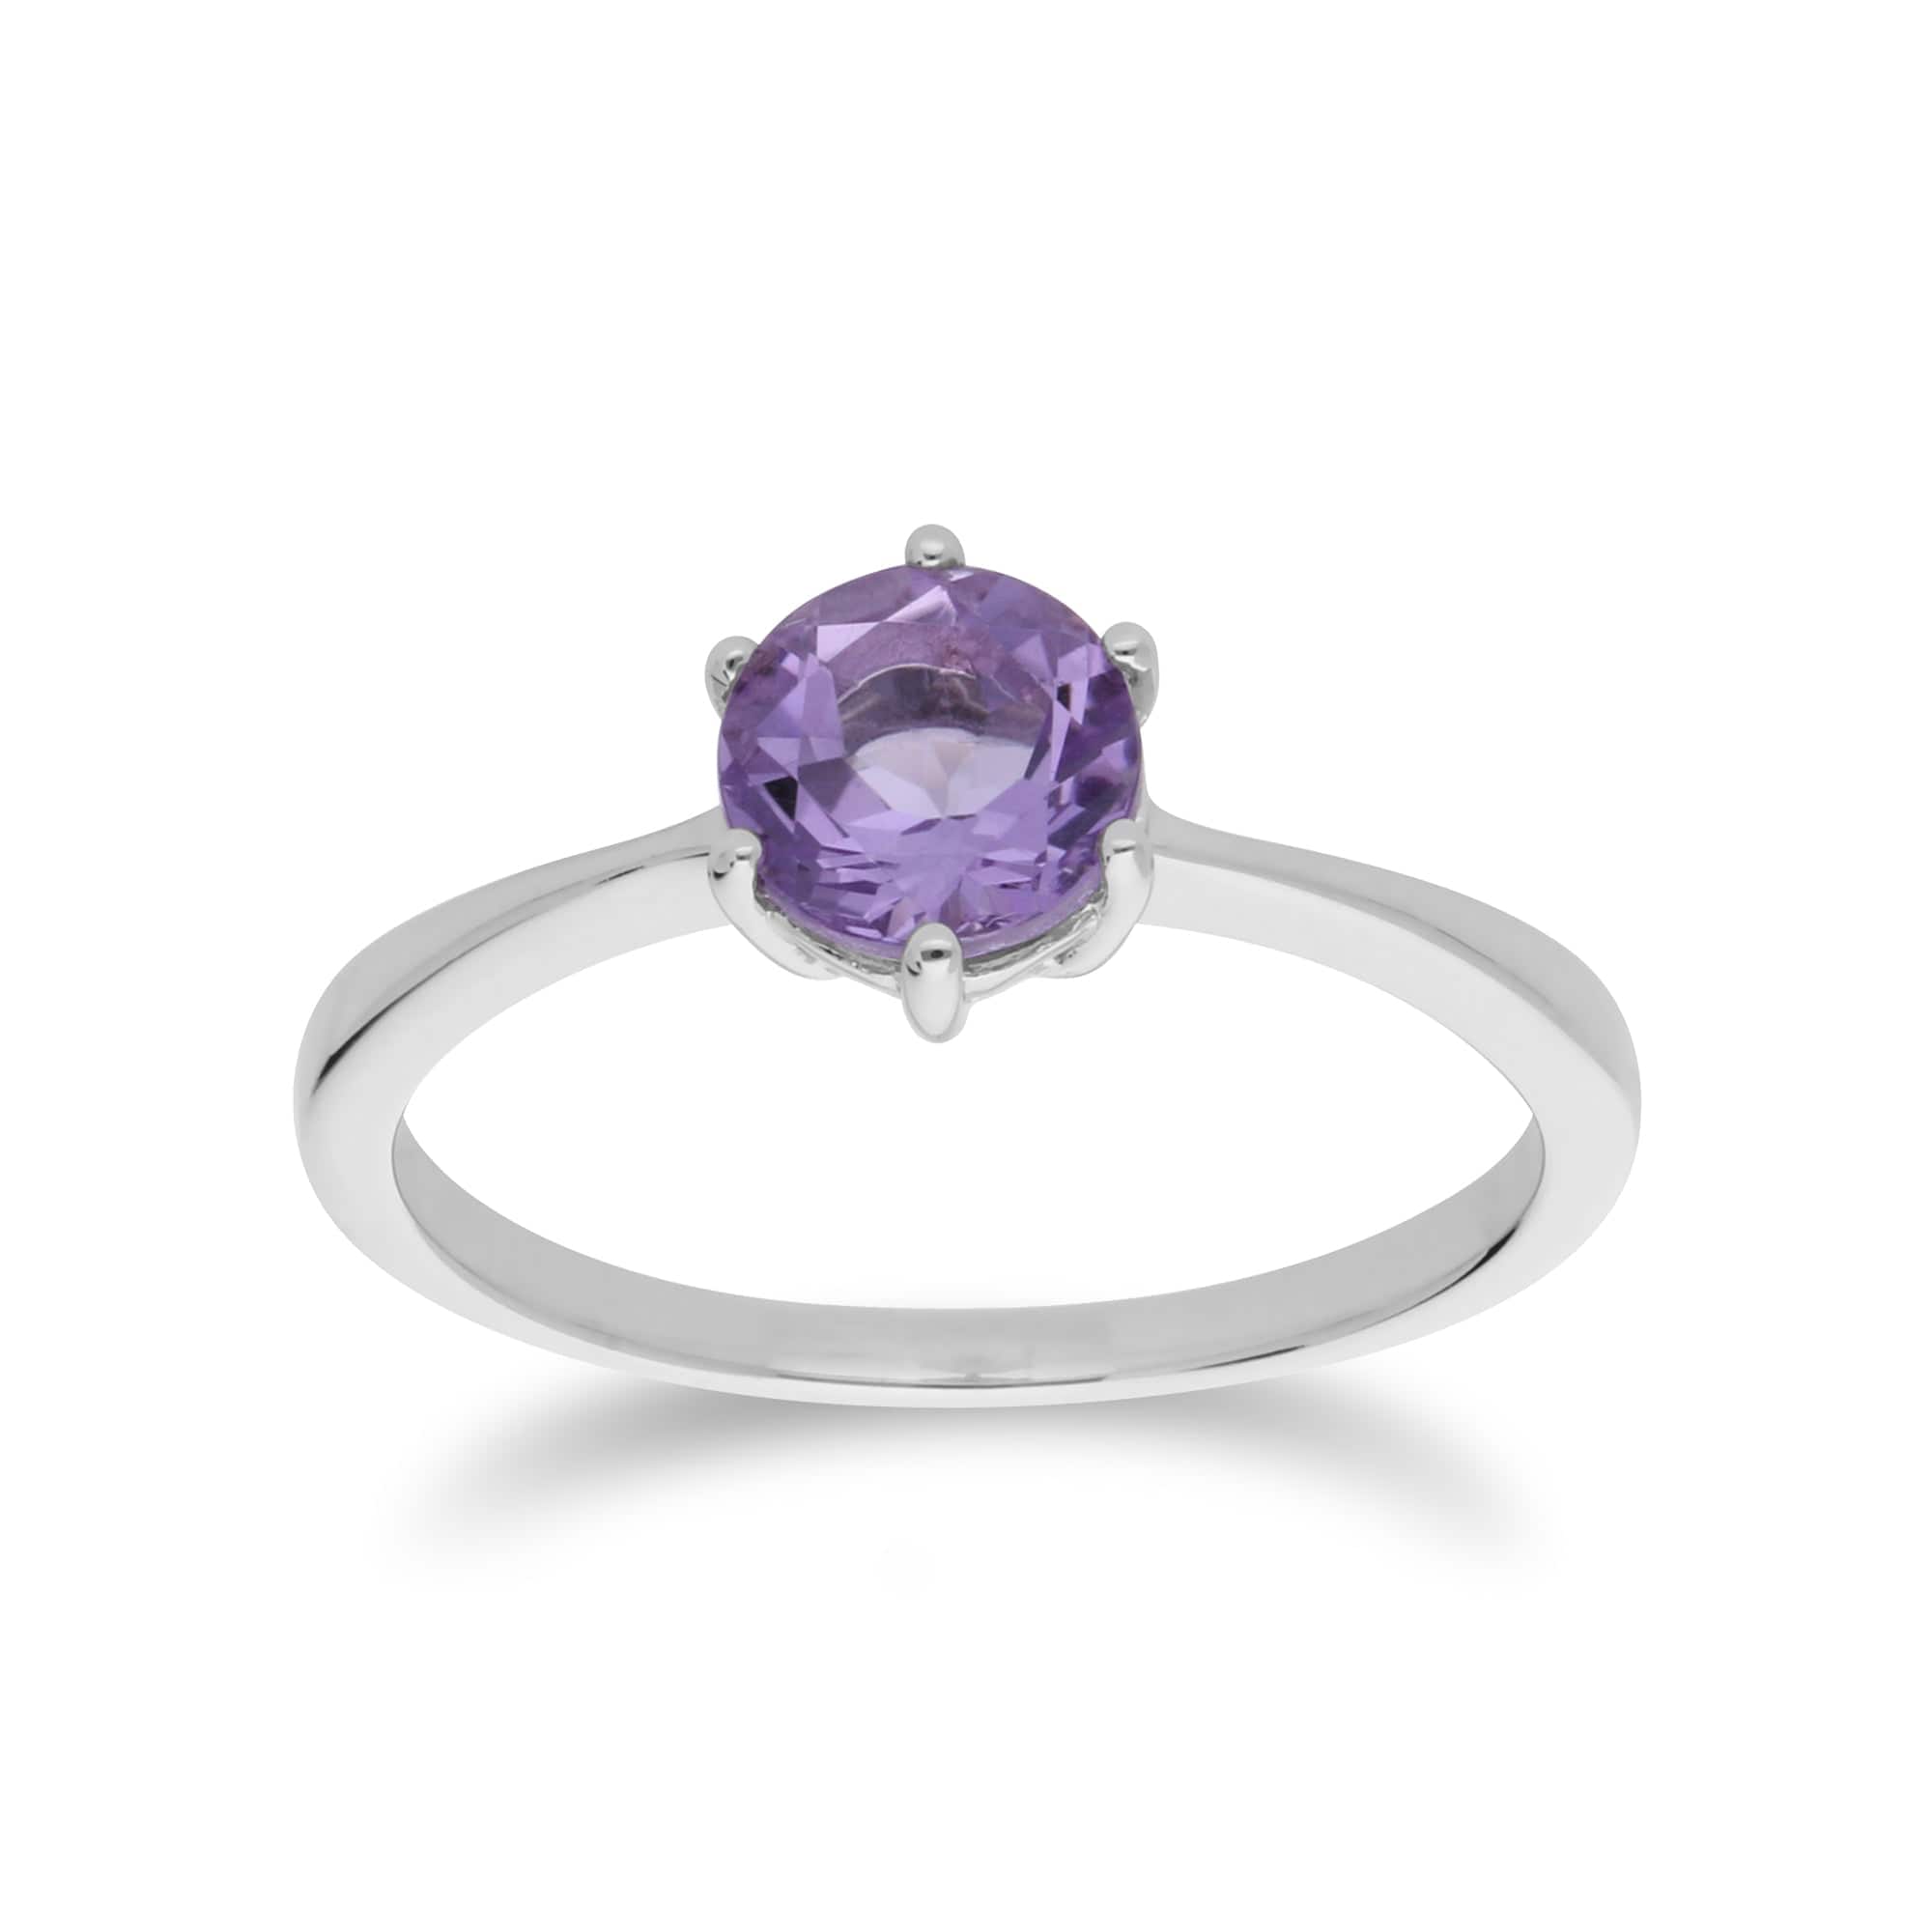 Classic Round Amethyst Claw Set Single Stone Ring in 925 Sterling Silver - Gemondo